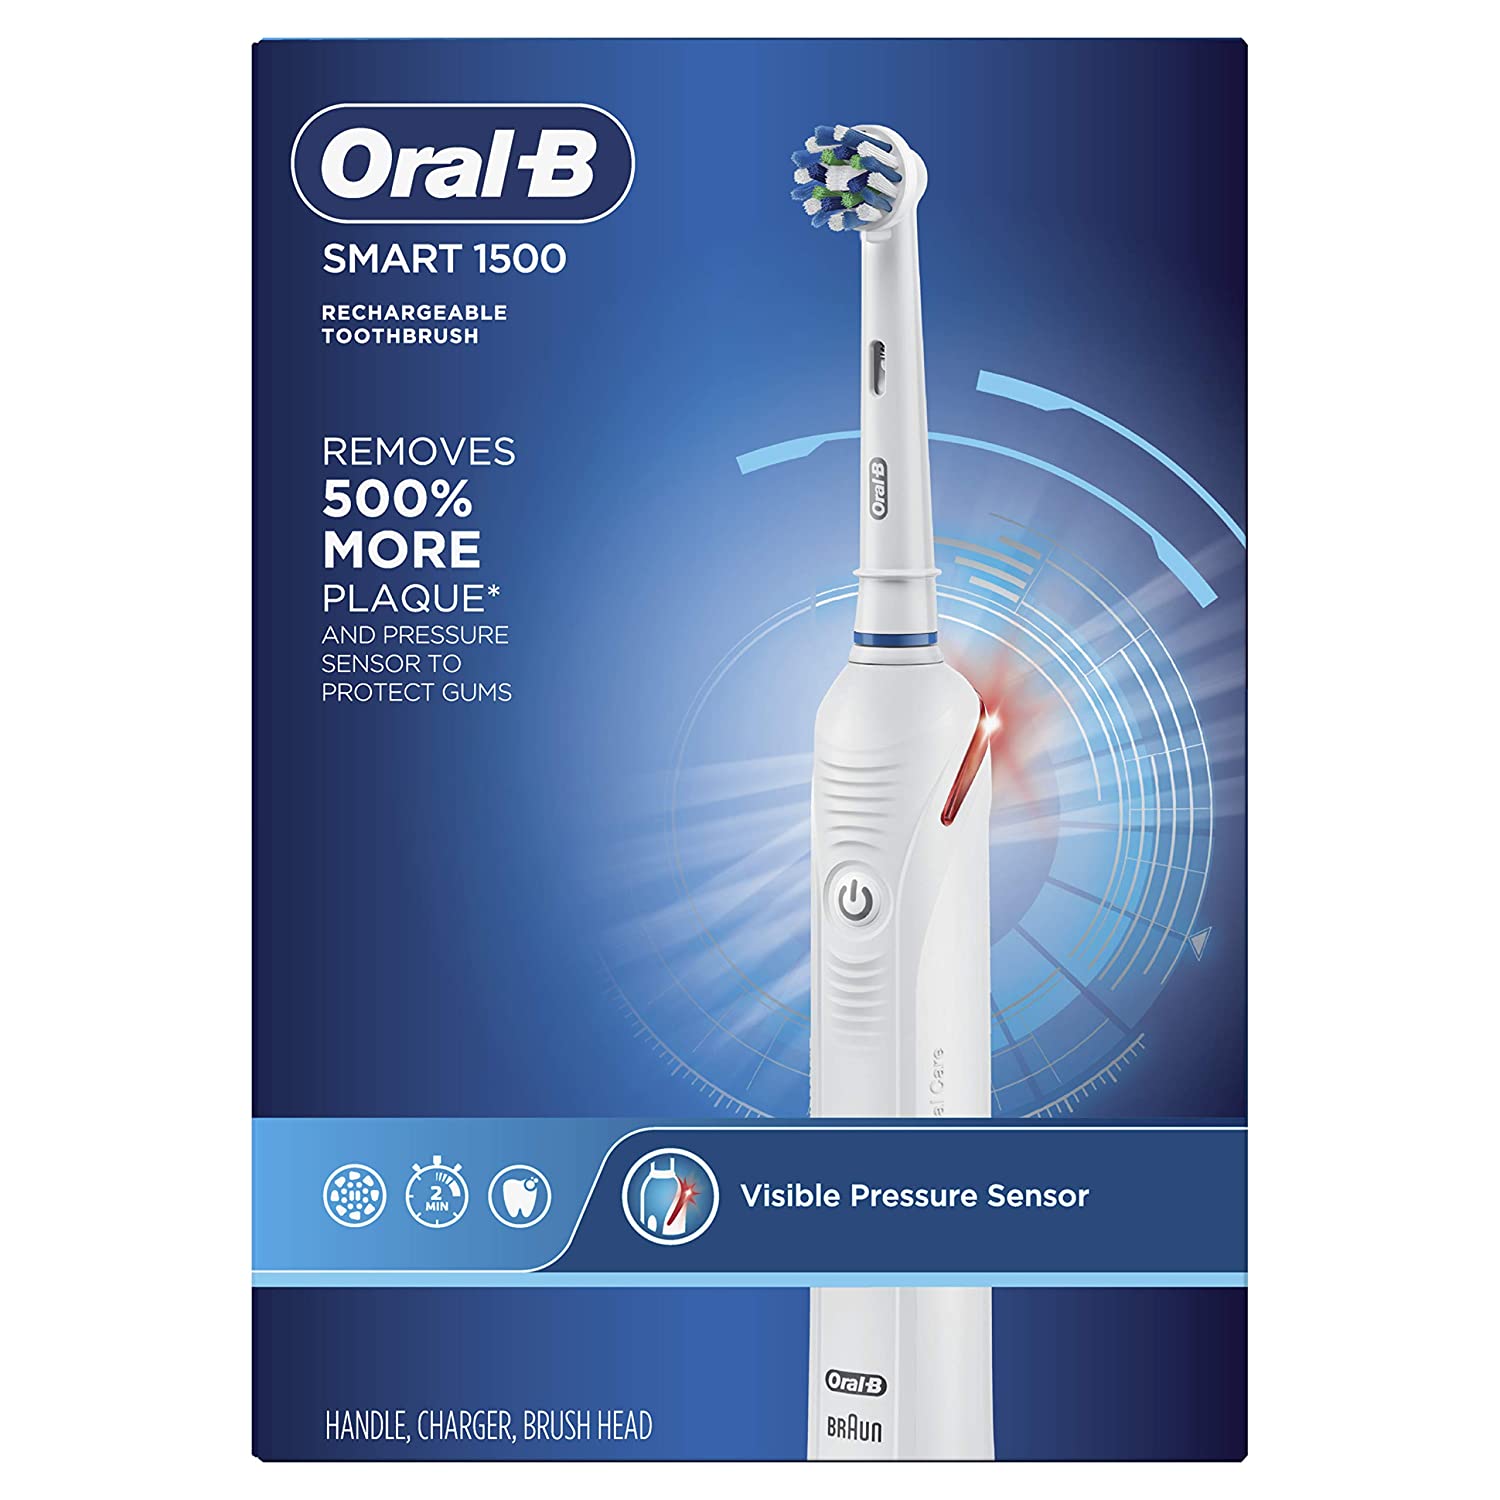 Oral-B Smart 1500 Electric Toothbrush